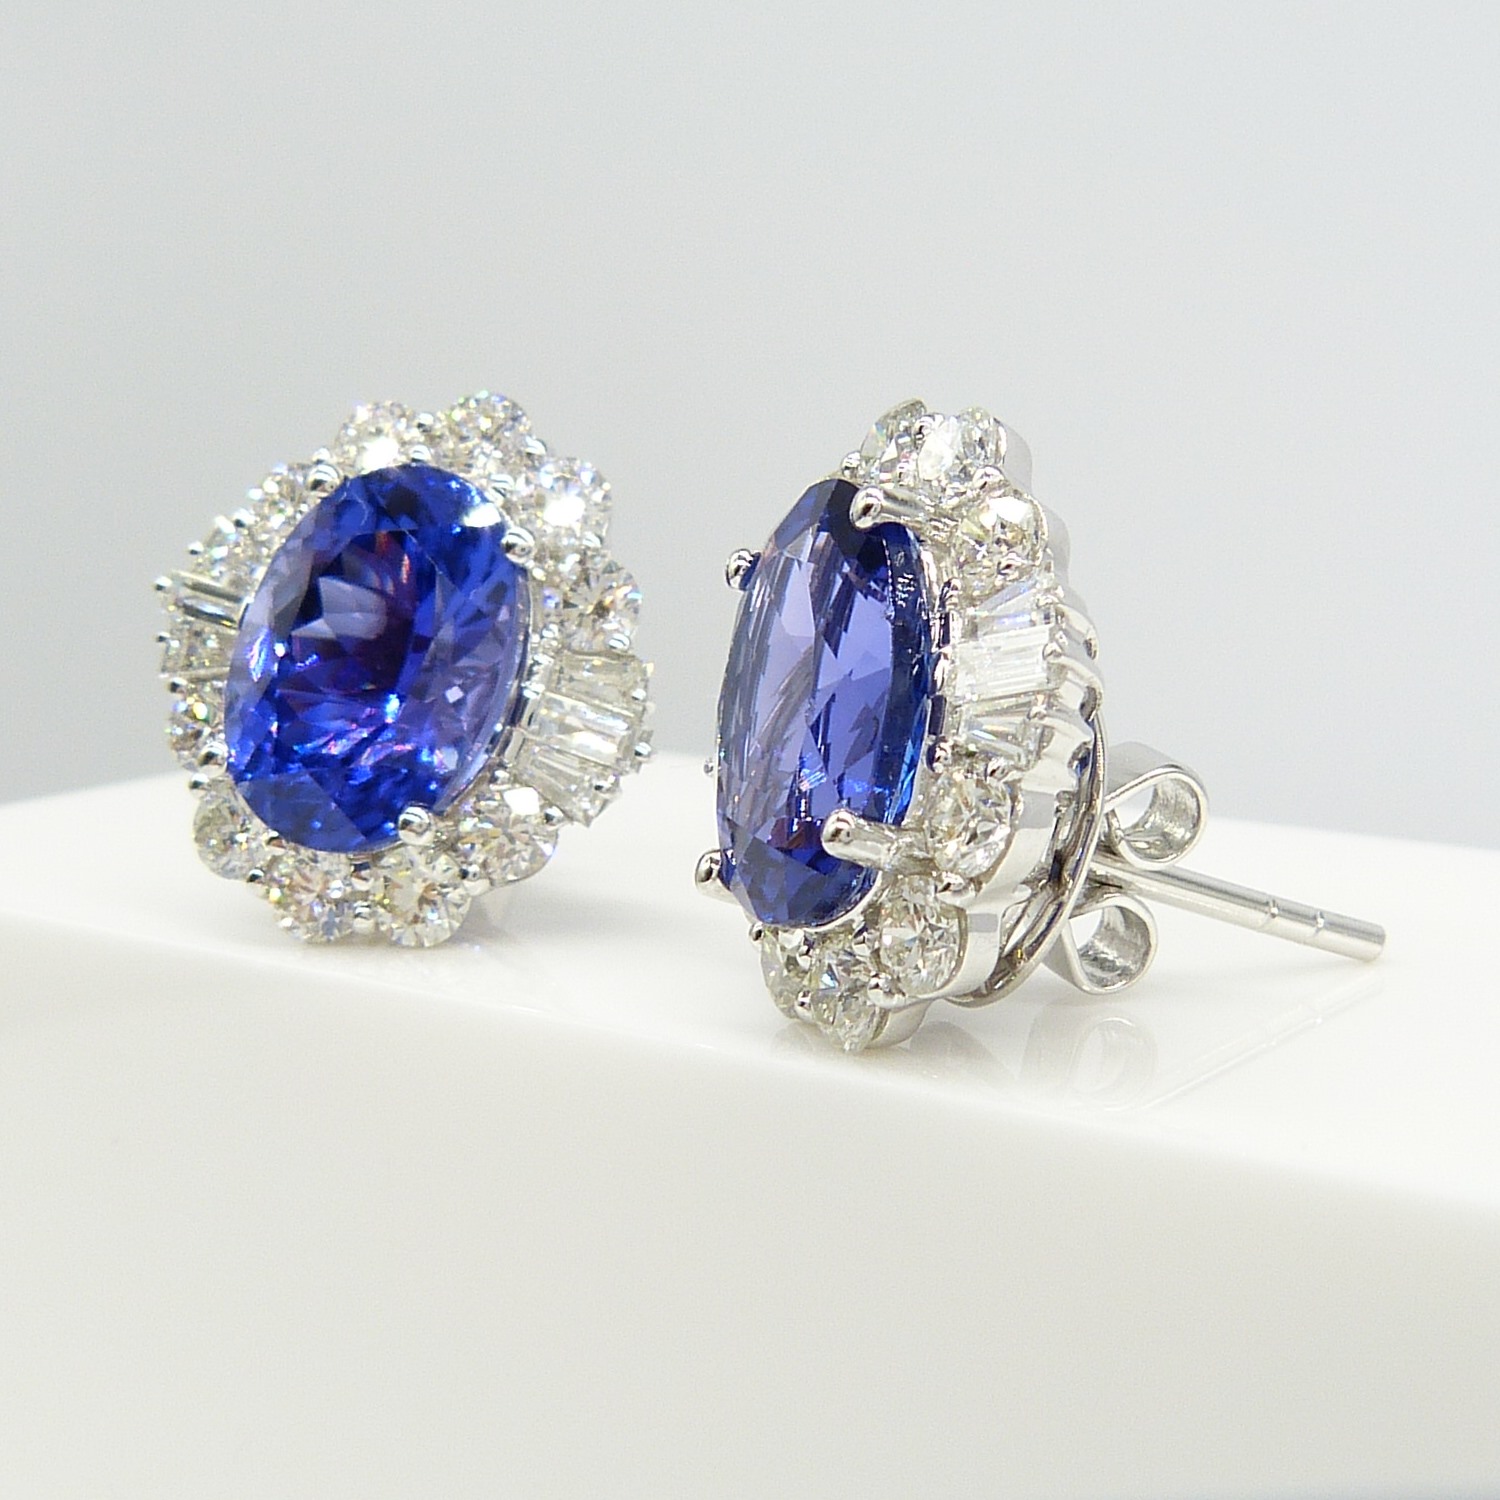 A large pair of loupe-clean tanzanite and diamond cluster earrings in 18ct white gold, certificated - Image 5 of 9